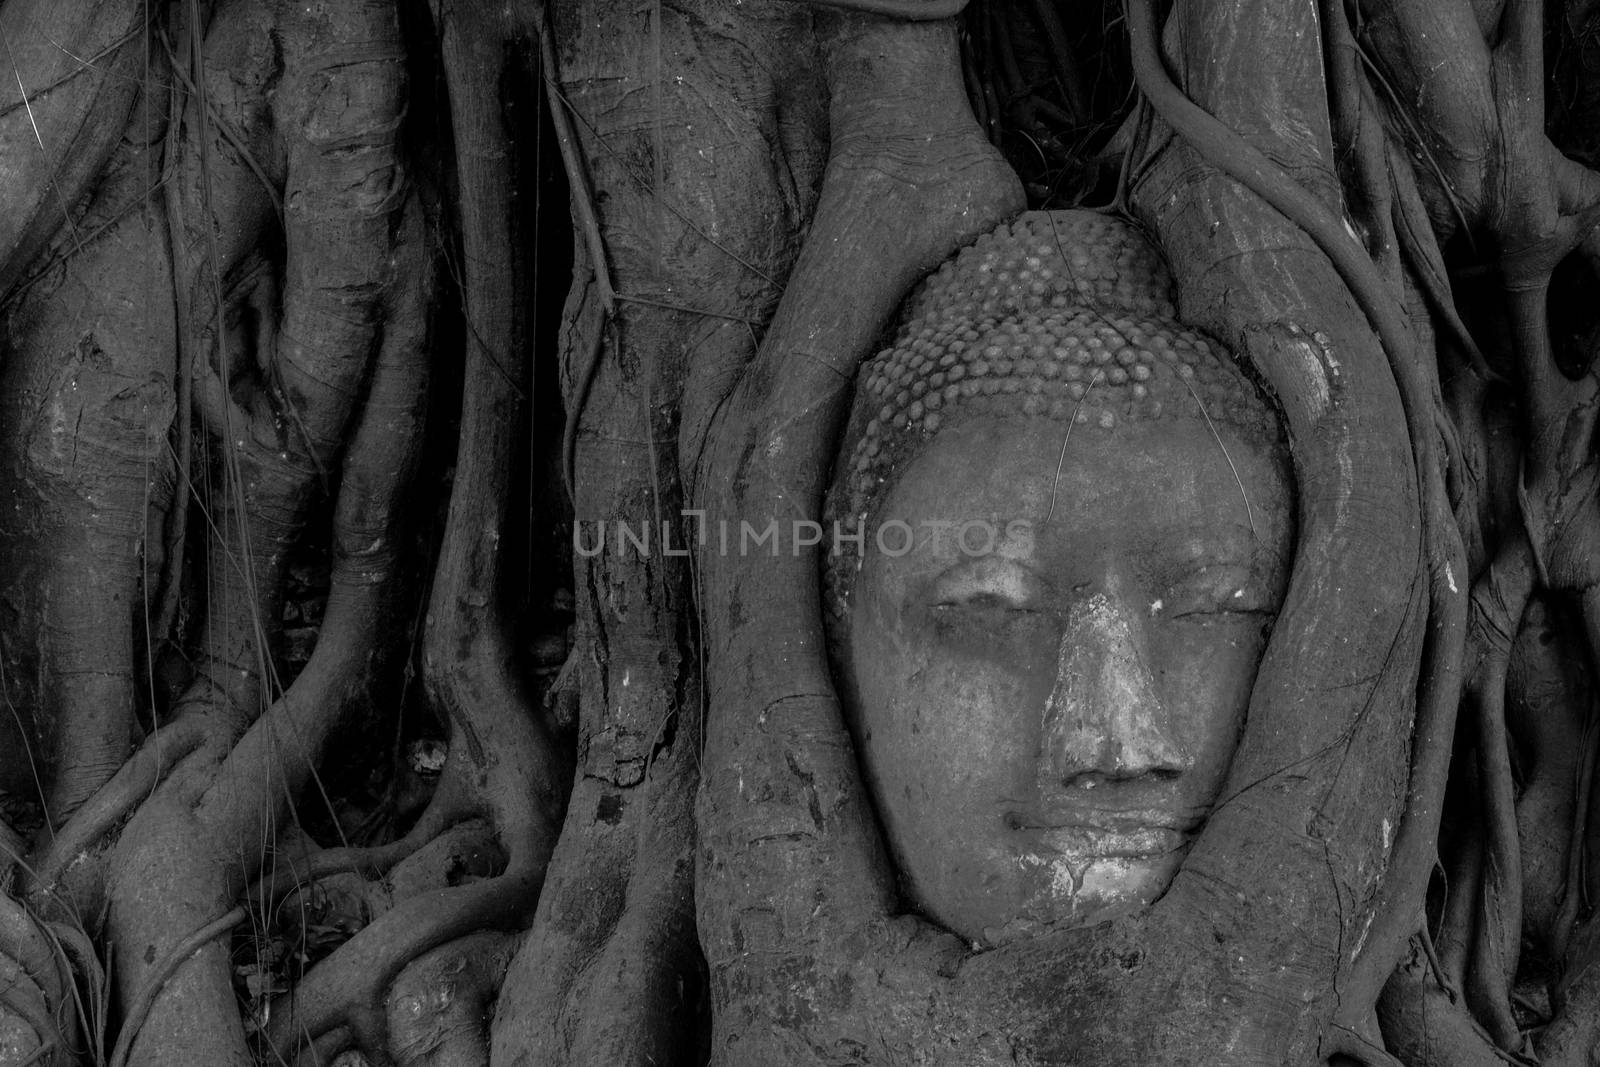 The Head of sandstone Buddha in tree roots at Wat Mahathat, Ayutthaya, Thailand, black and white